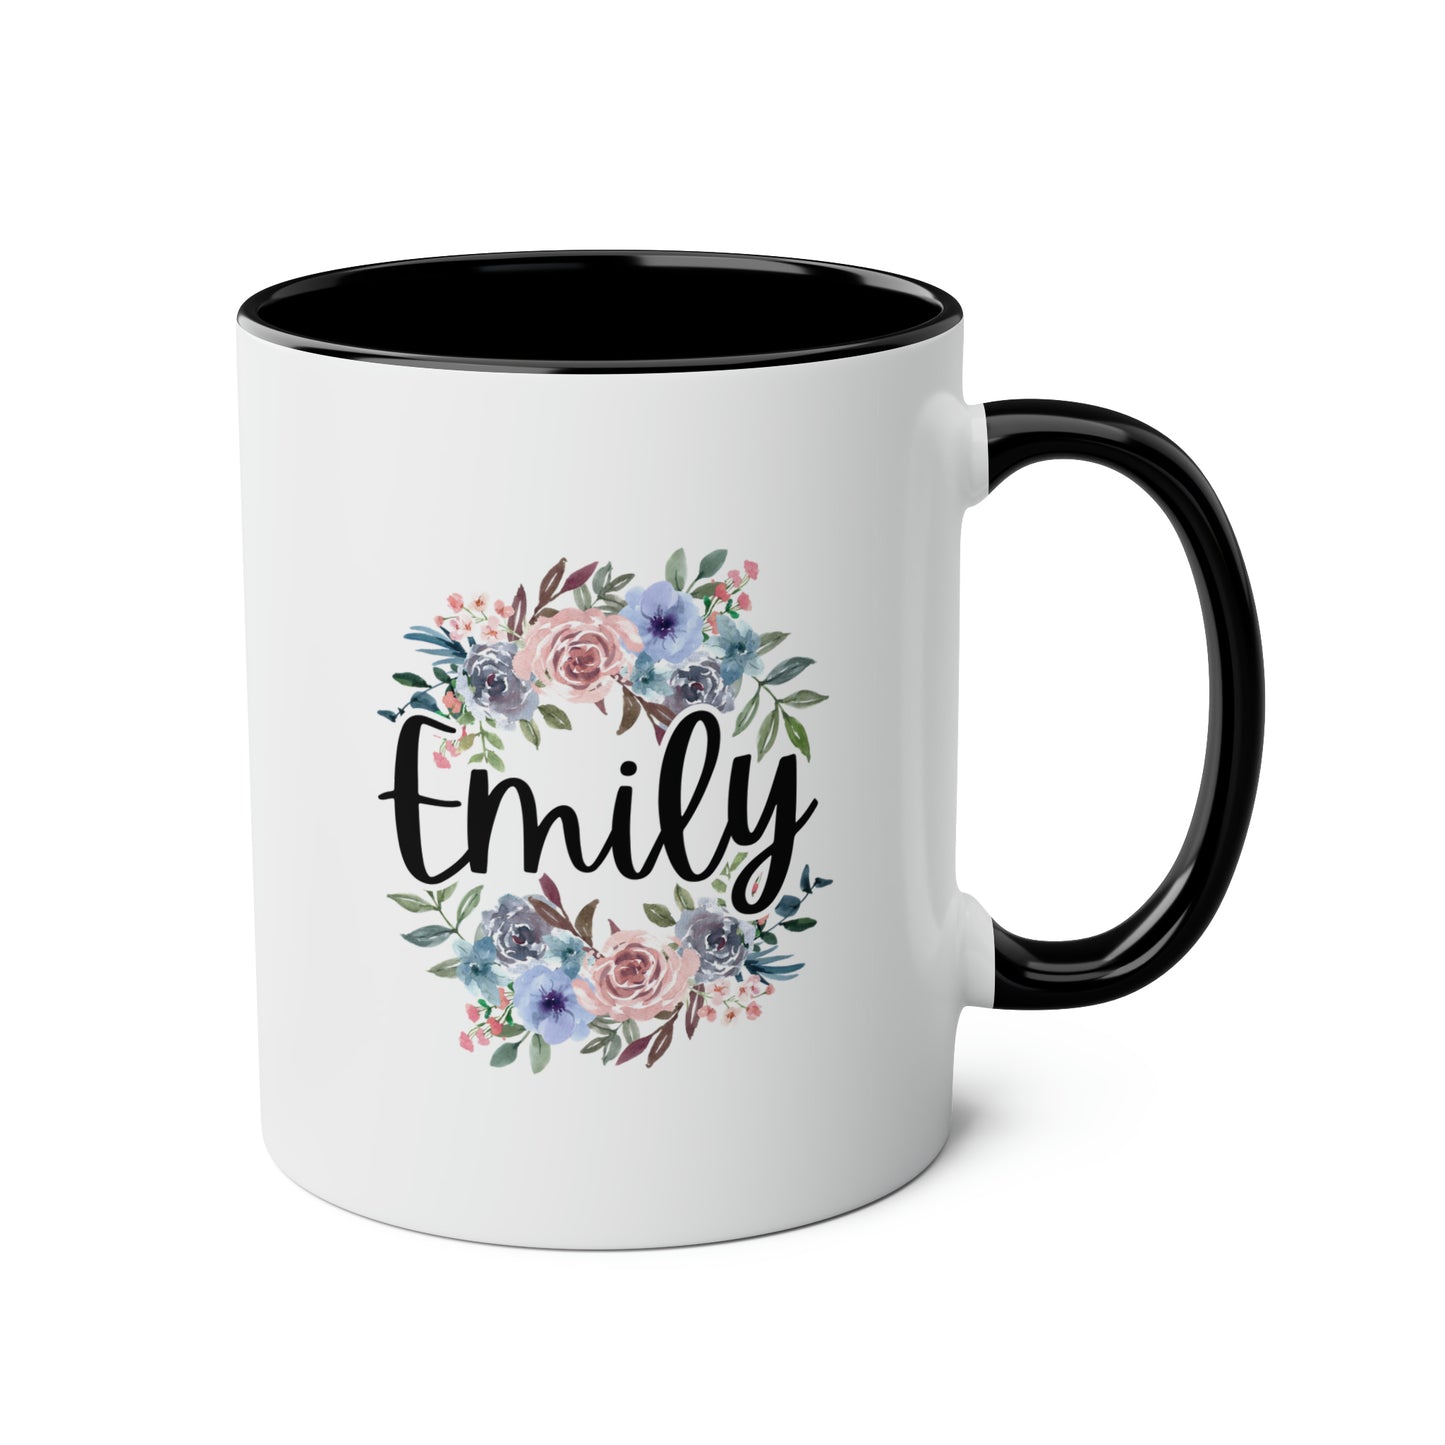 Flowers Name 11oz white with black accent funny large coffee mug gift for her floral bridesmaid christmas mothers day custom customized personalized waveywares wavey wares wavywares wavy wares